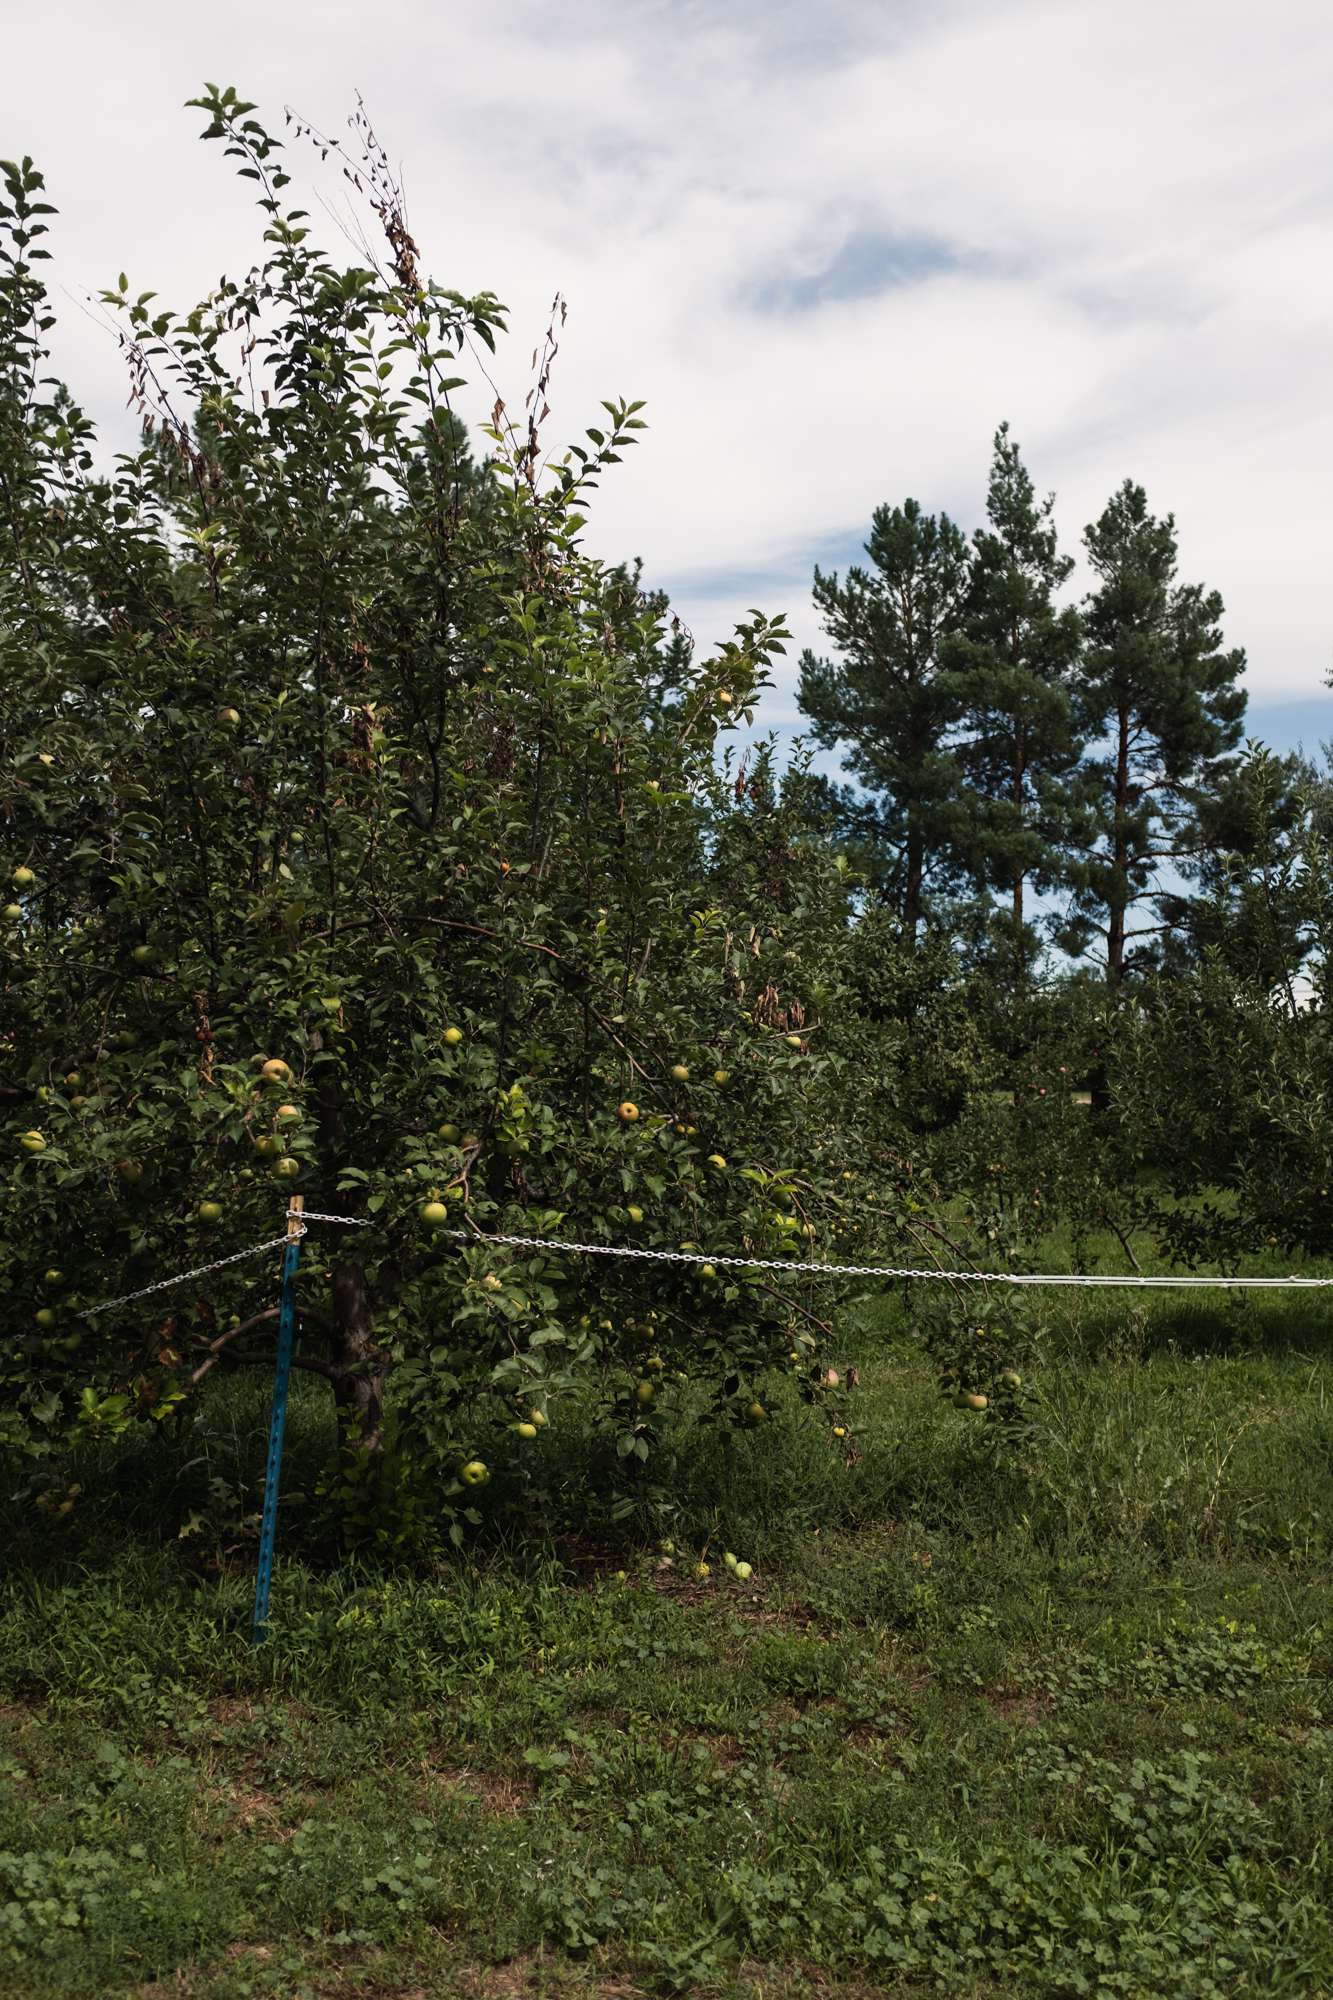 Apple Tree in an Orchard